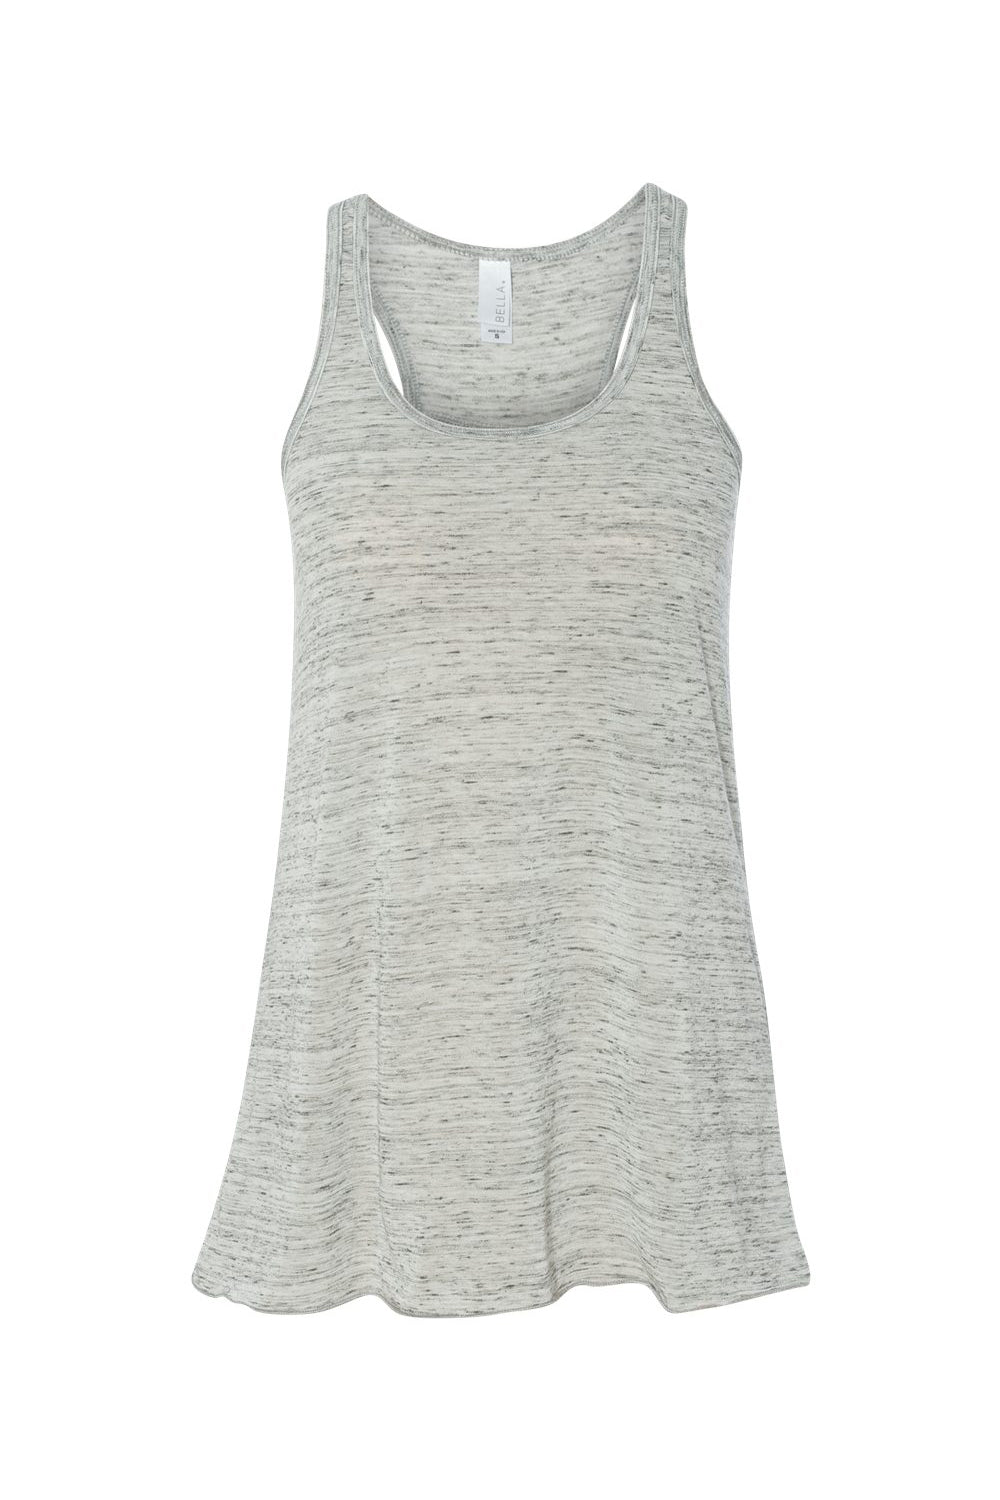 Bella + Canvas BC8800/B8800/8800 Womens Flowy Tank Top White Marble Flat Front